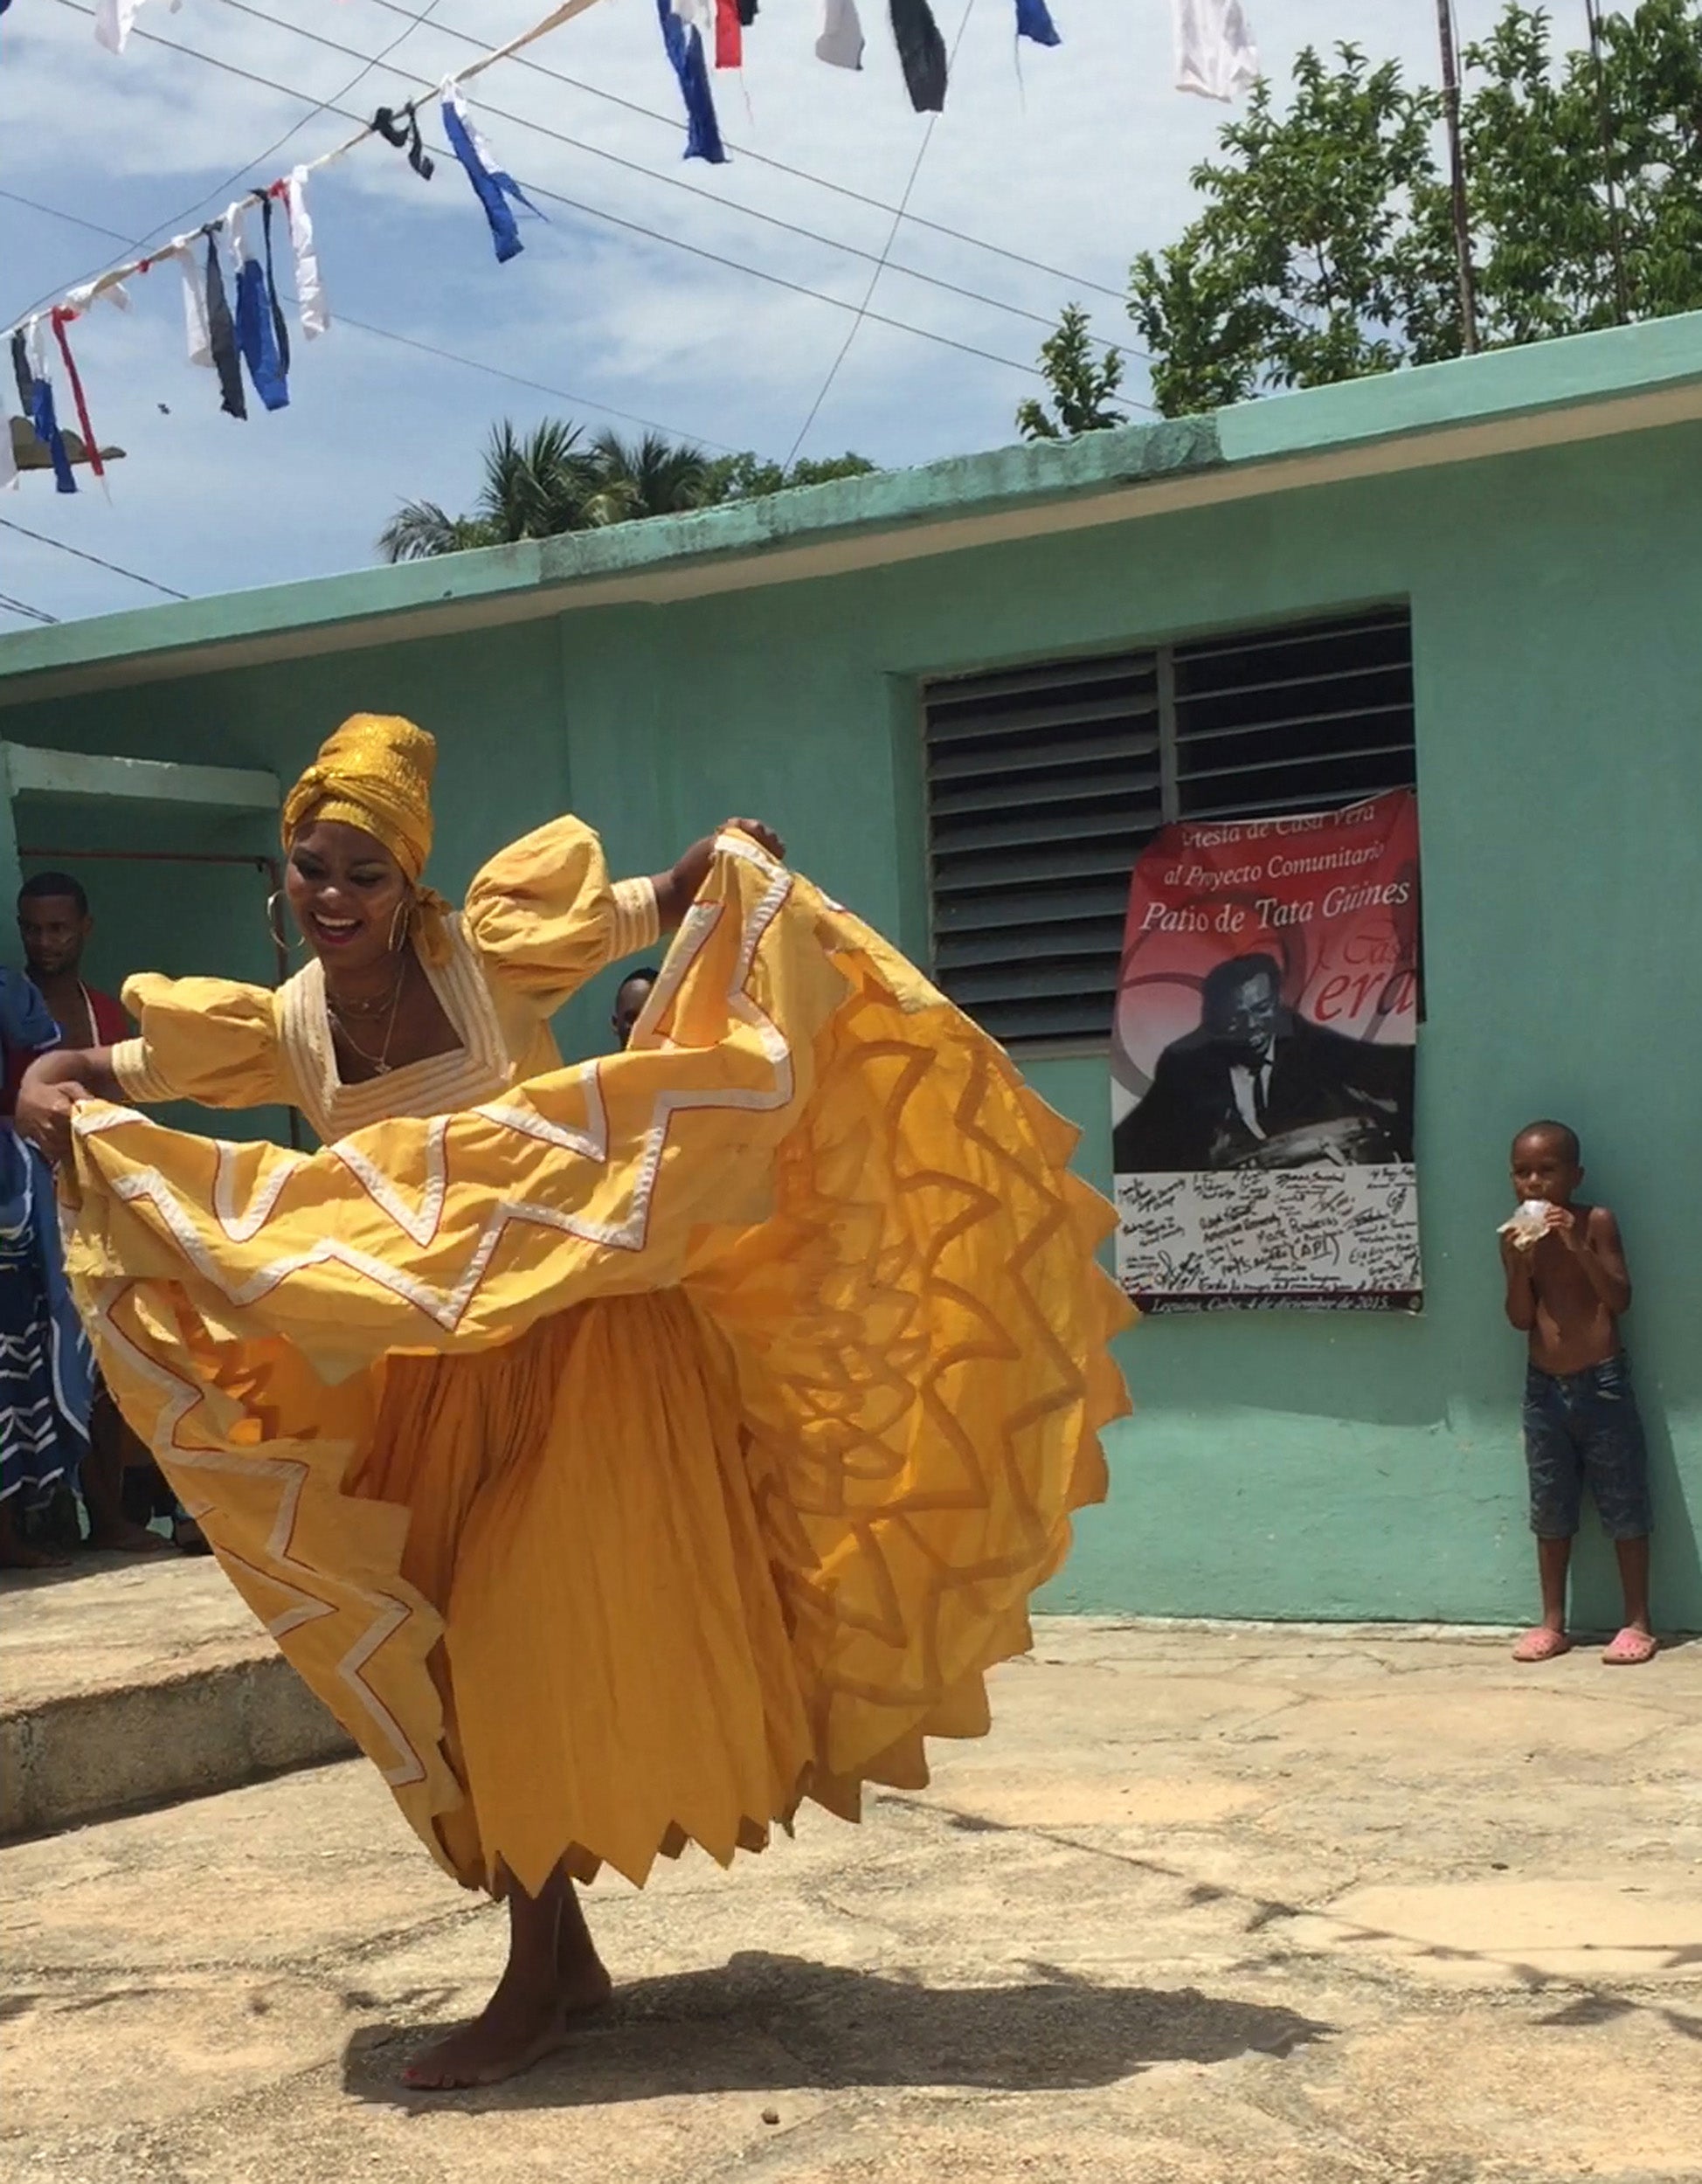 A member of the National Folkloric Company of Cuba dances in the Tata Güines museum courtyard.